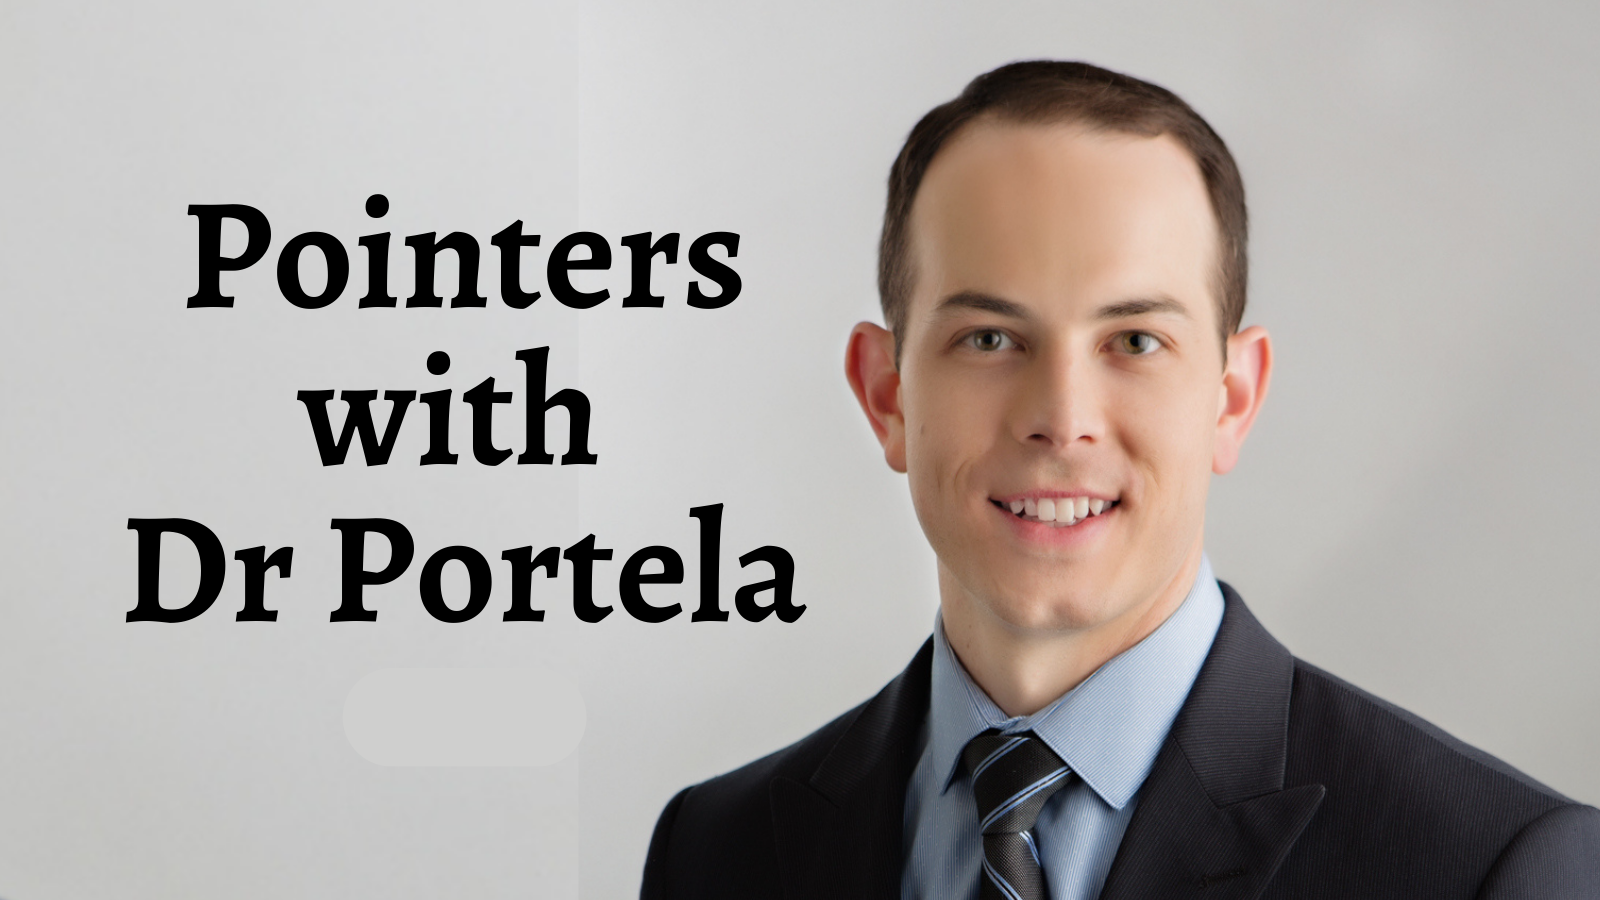 Pointers with Dr Portela: Sugaring for Hair Removal